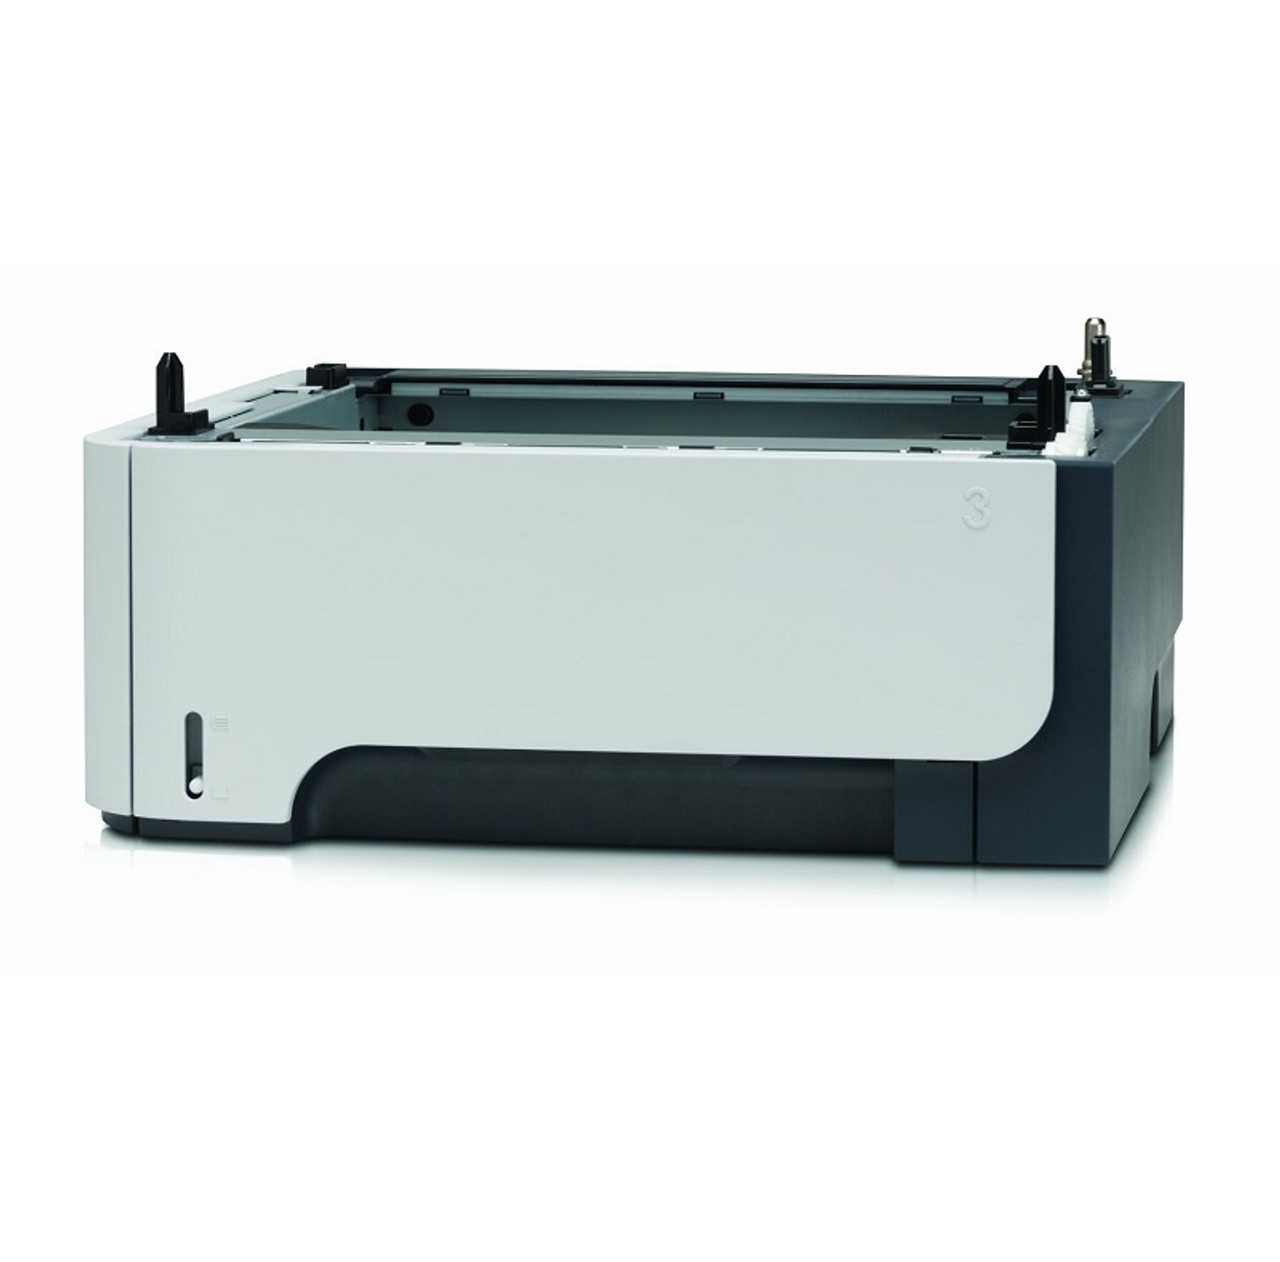 C4125A - HP 500-Sheets Paper Feeder Tray Assembly for LaserJet 4000 / 4050 / 4100 Series Printer (Refurbished / Grade-A)